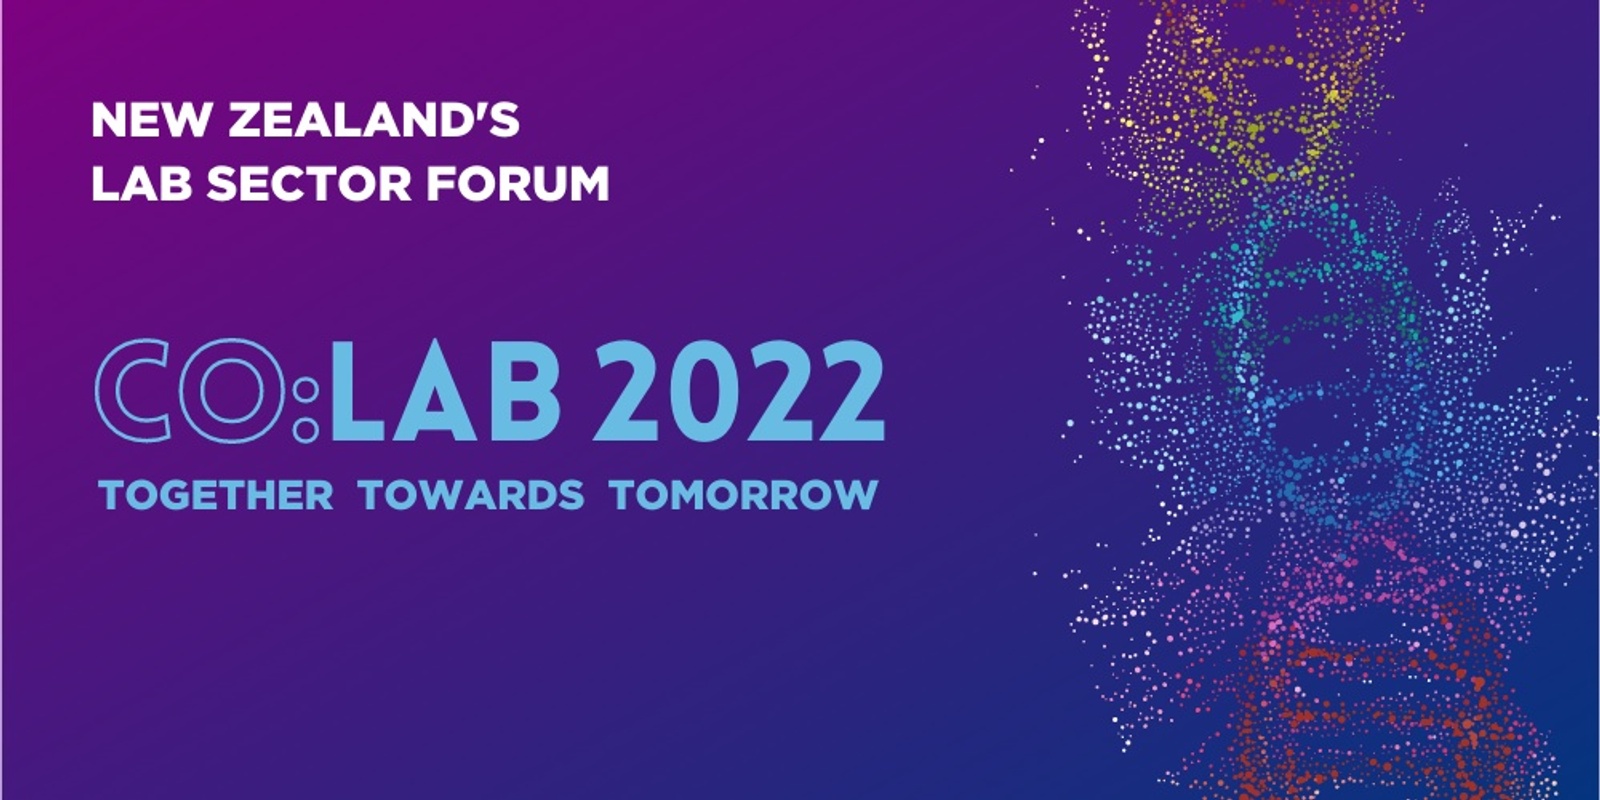 CO:LAB 2022 - New Zealand's Lab Sector Forum